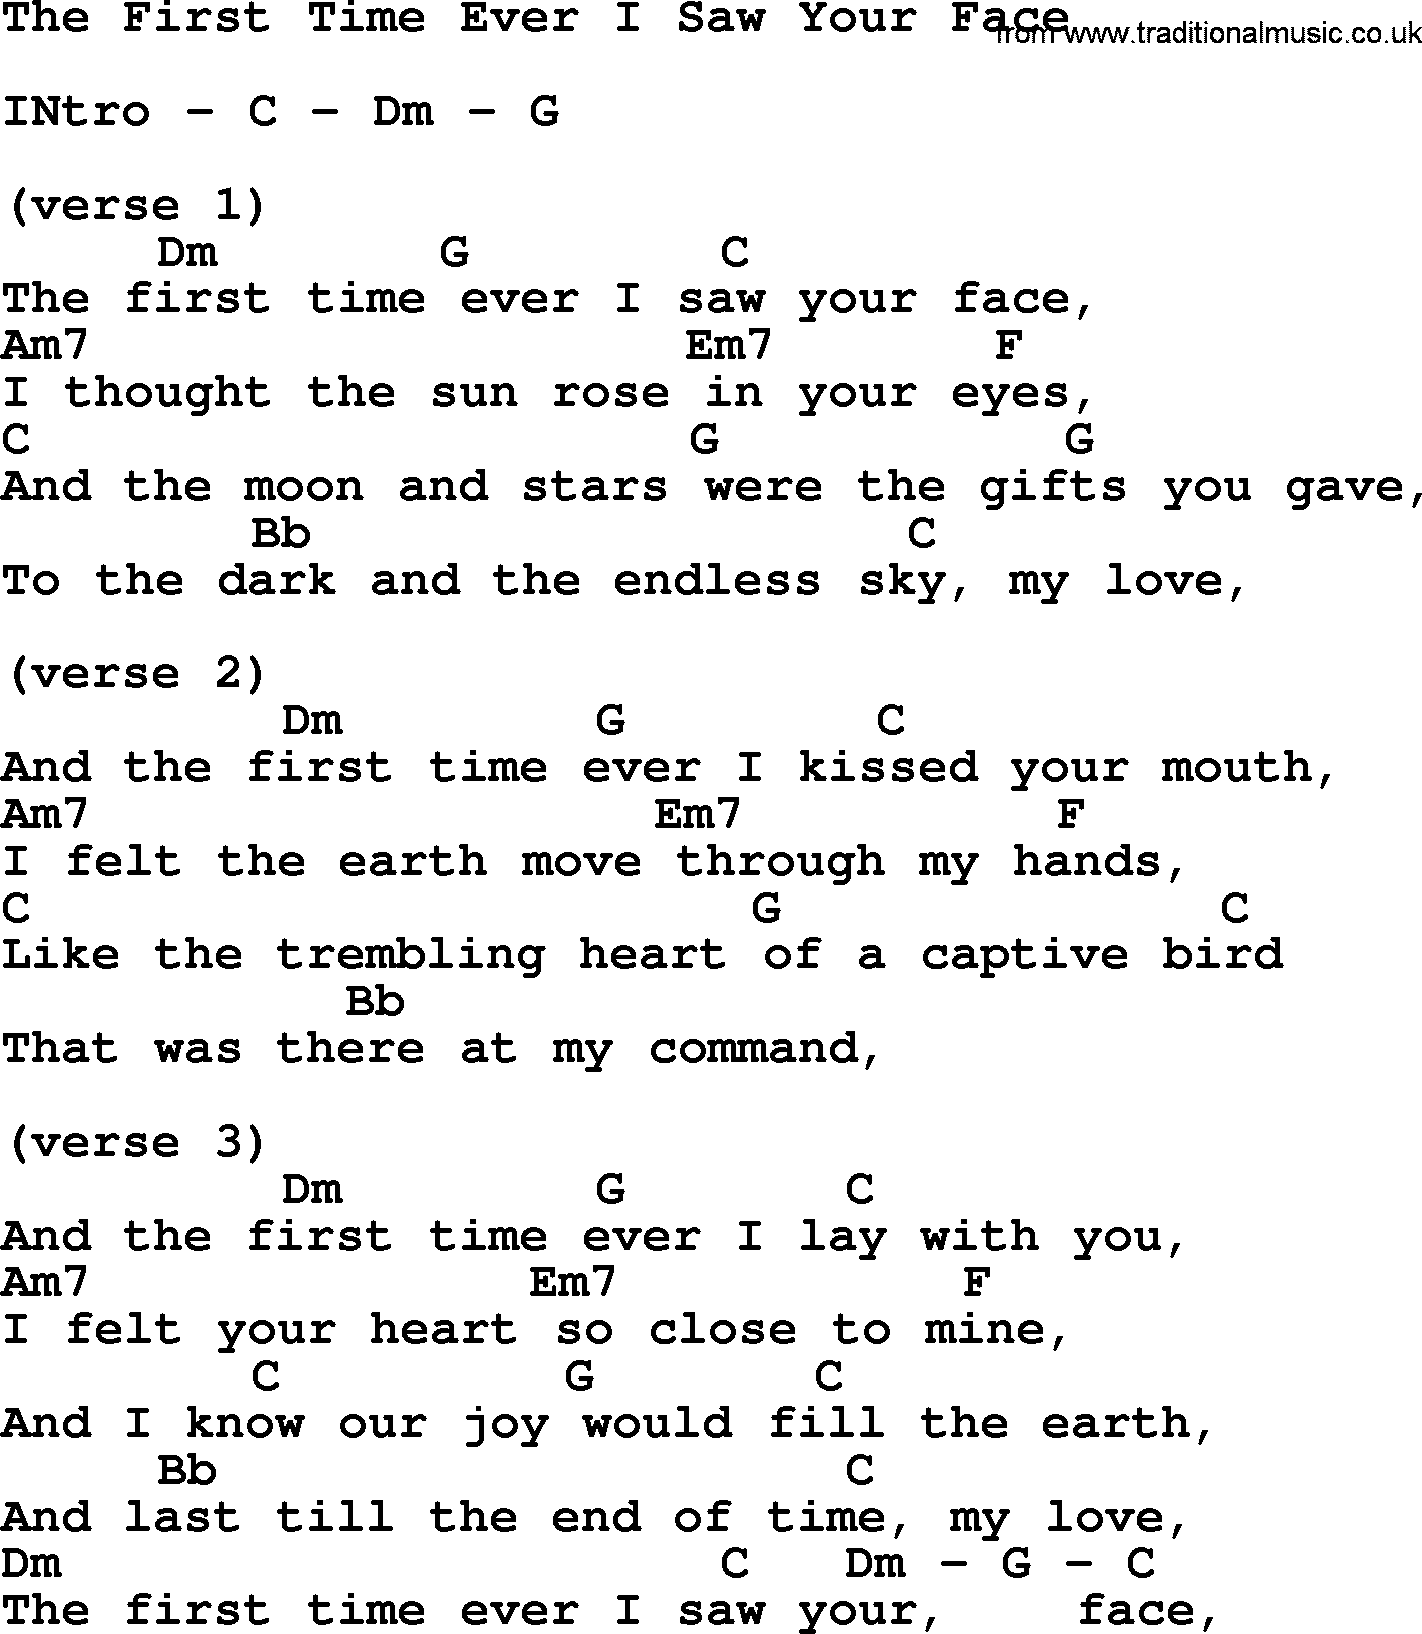 Johnny Cash song The First Time Ever I Saw Your Face, lyrics and chords